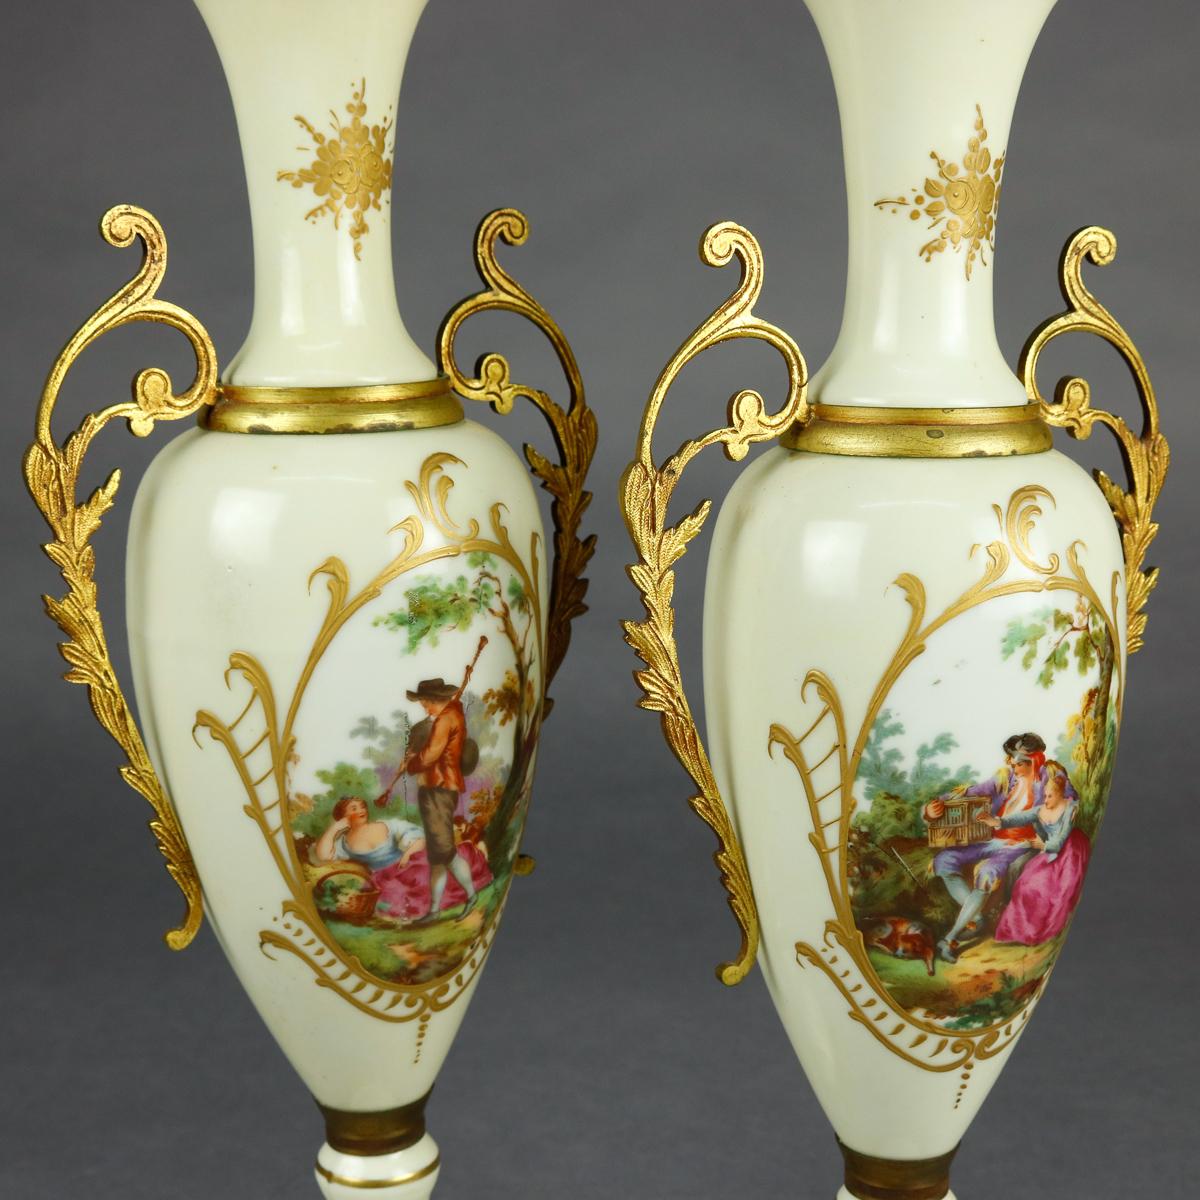 Antique French Sevres Pictorial Hand Painted and Gilt Porcelain and Bronze Urns 2